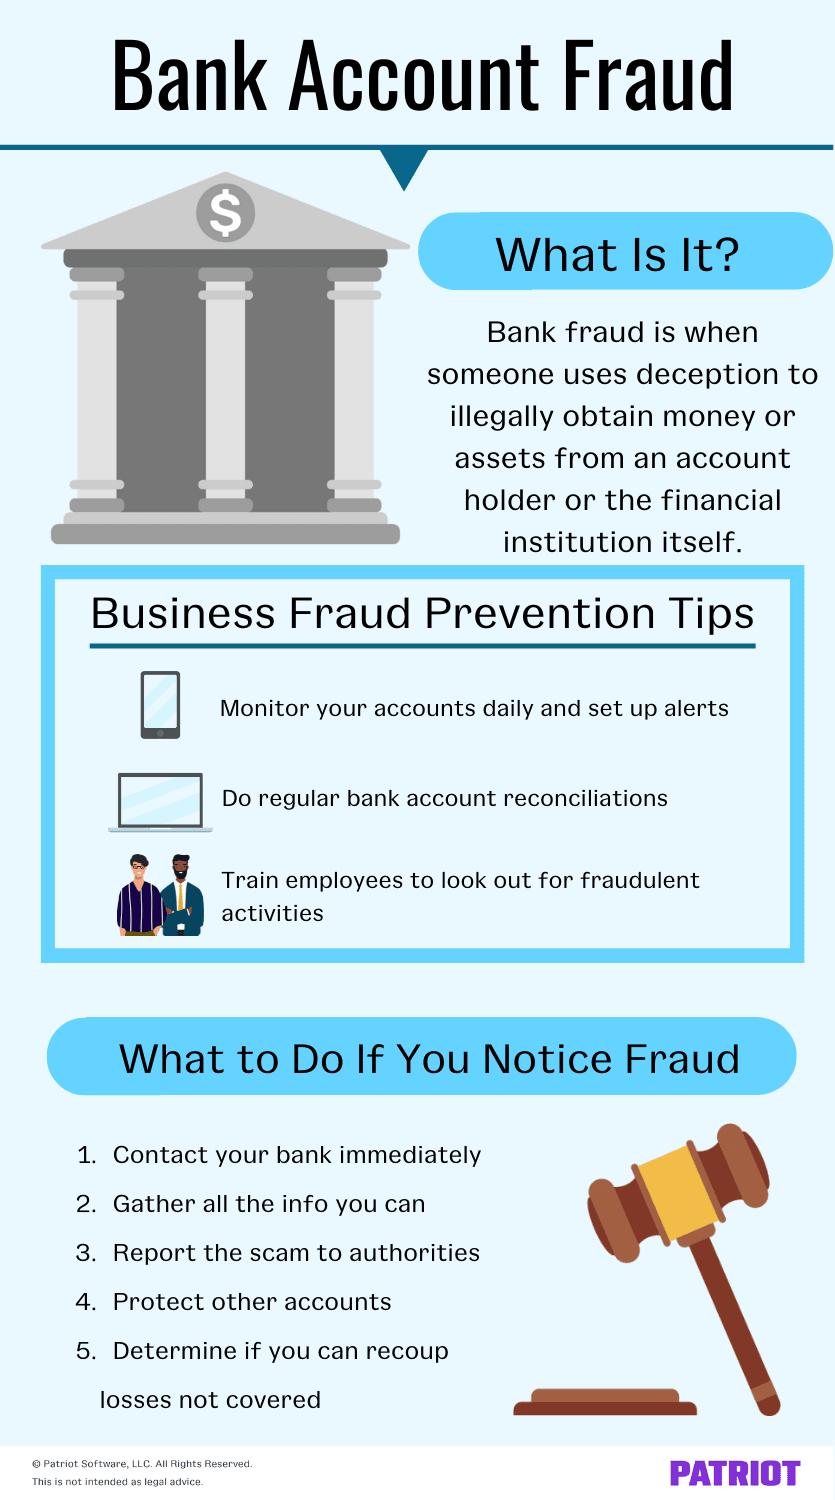 Bank account fraud: what is it, prevention tips, and what to do if you notice fraud